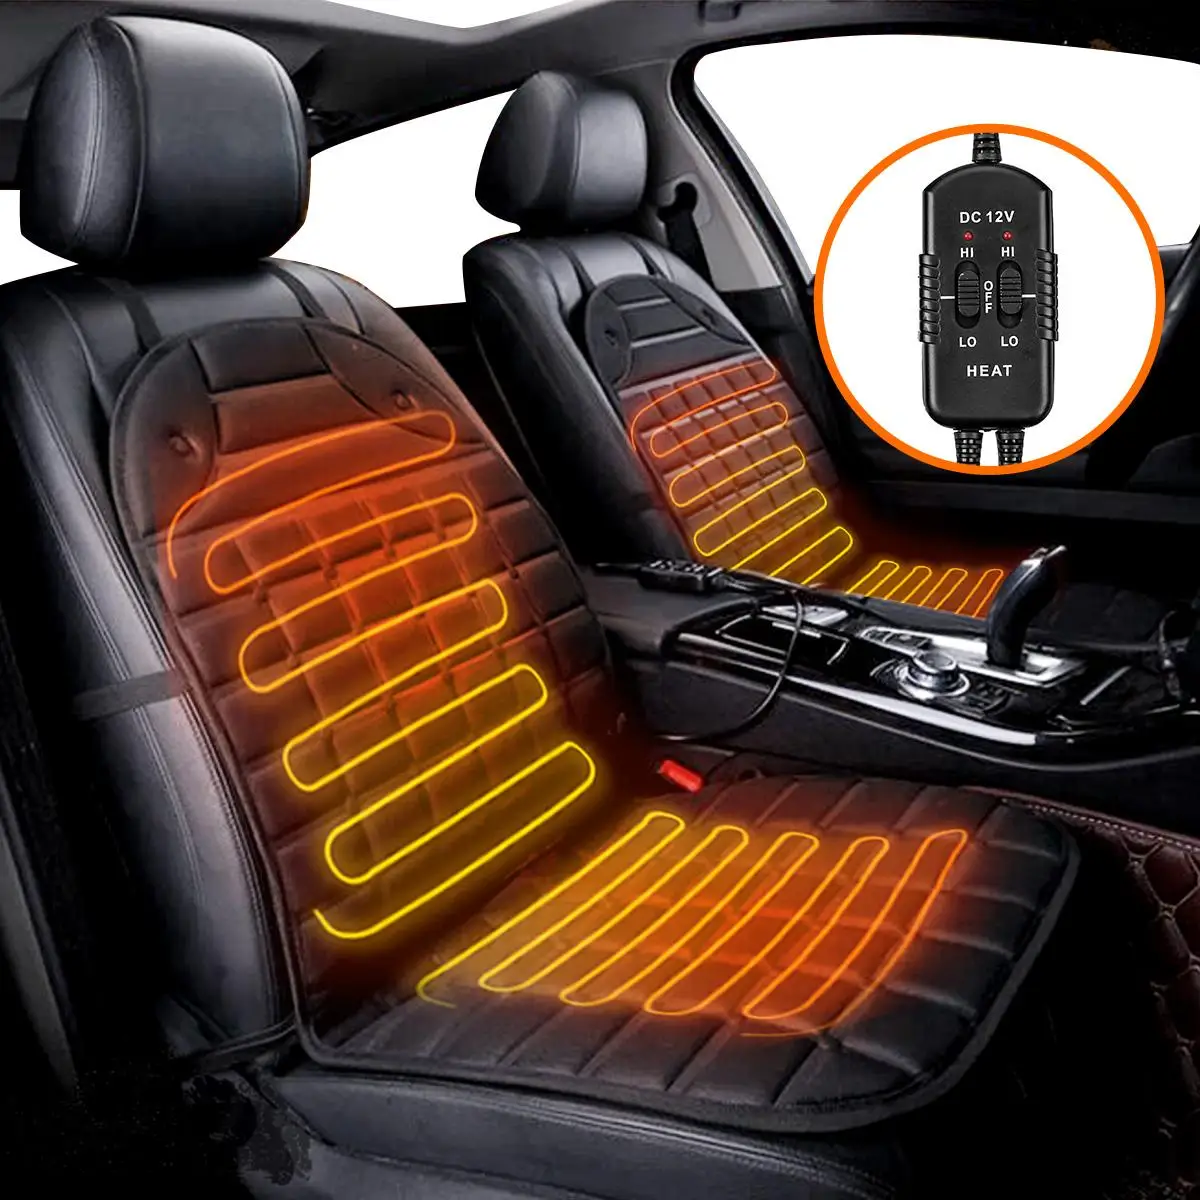 Heated 12 volt thermo car van seat cushion pad cover winter warmer heater 12v 